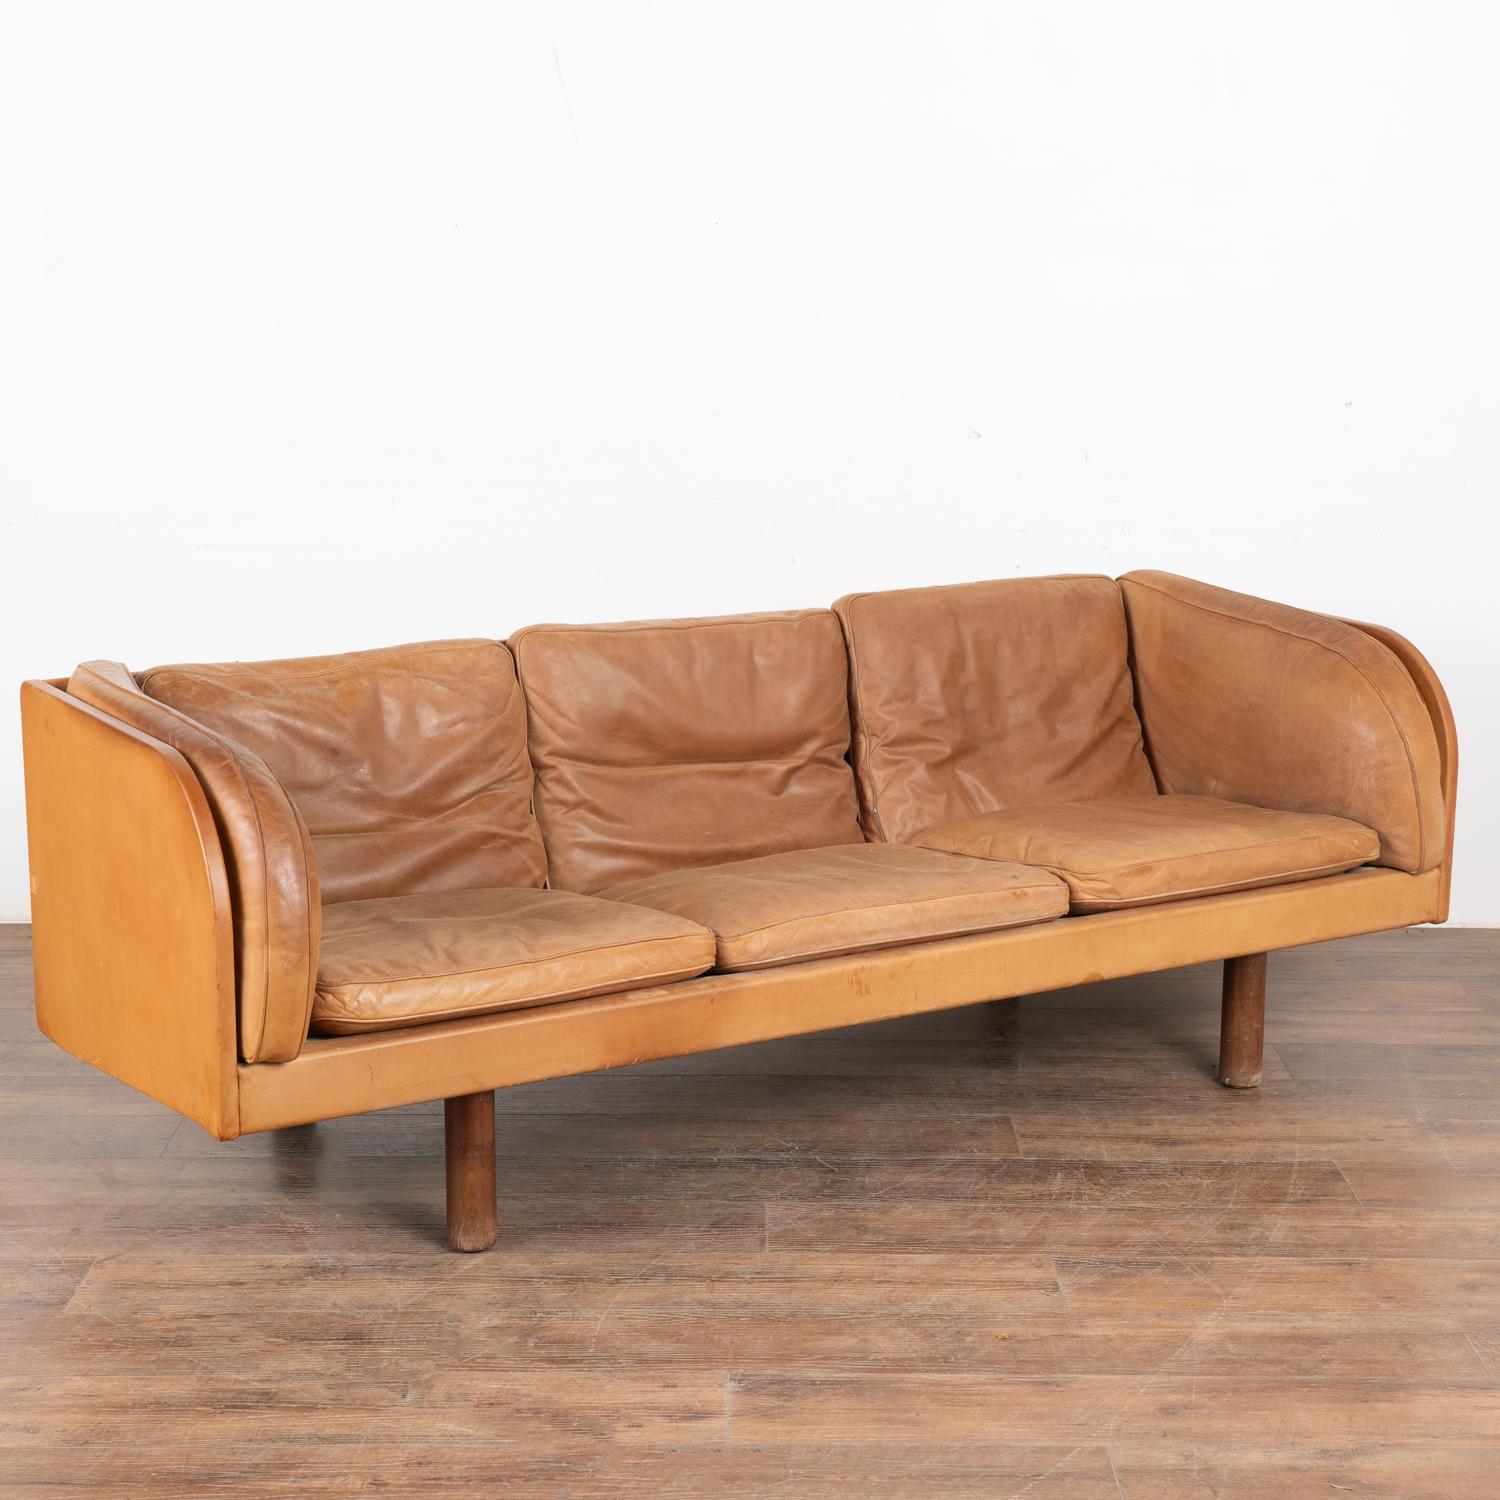 Handsome mid-century modern brown leather three-seat sofa with impressive, curved arms.
The years of use are revealed in the aged patina of the leather, including impressions, scuffs/scratches, stains, discolorations throughout, etc. which all add